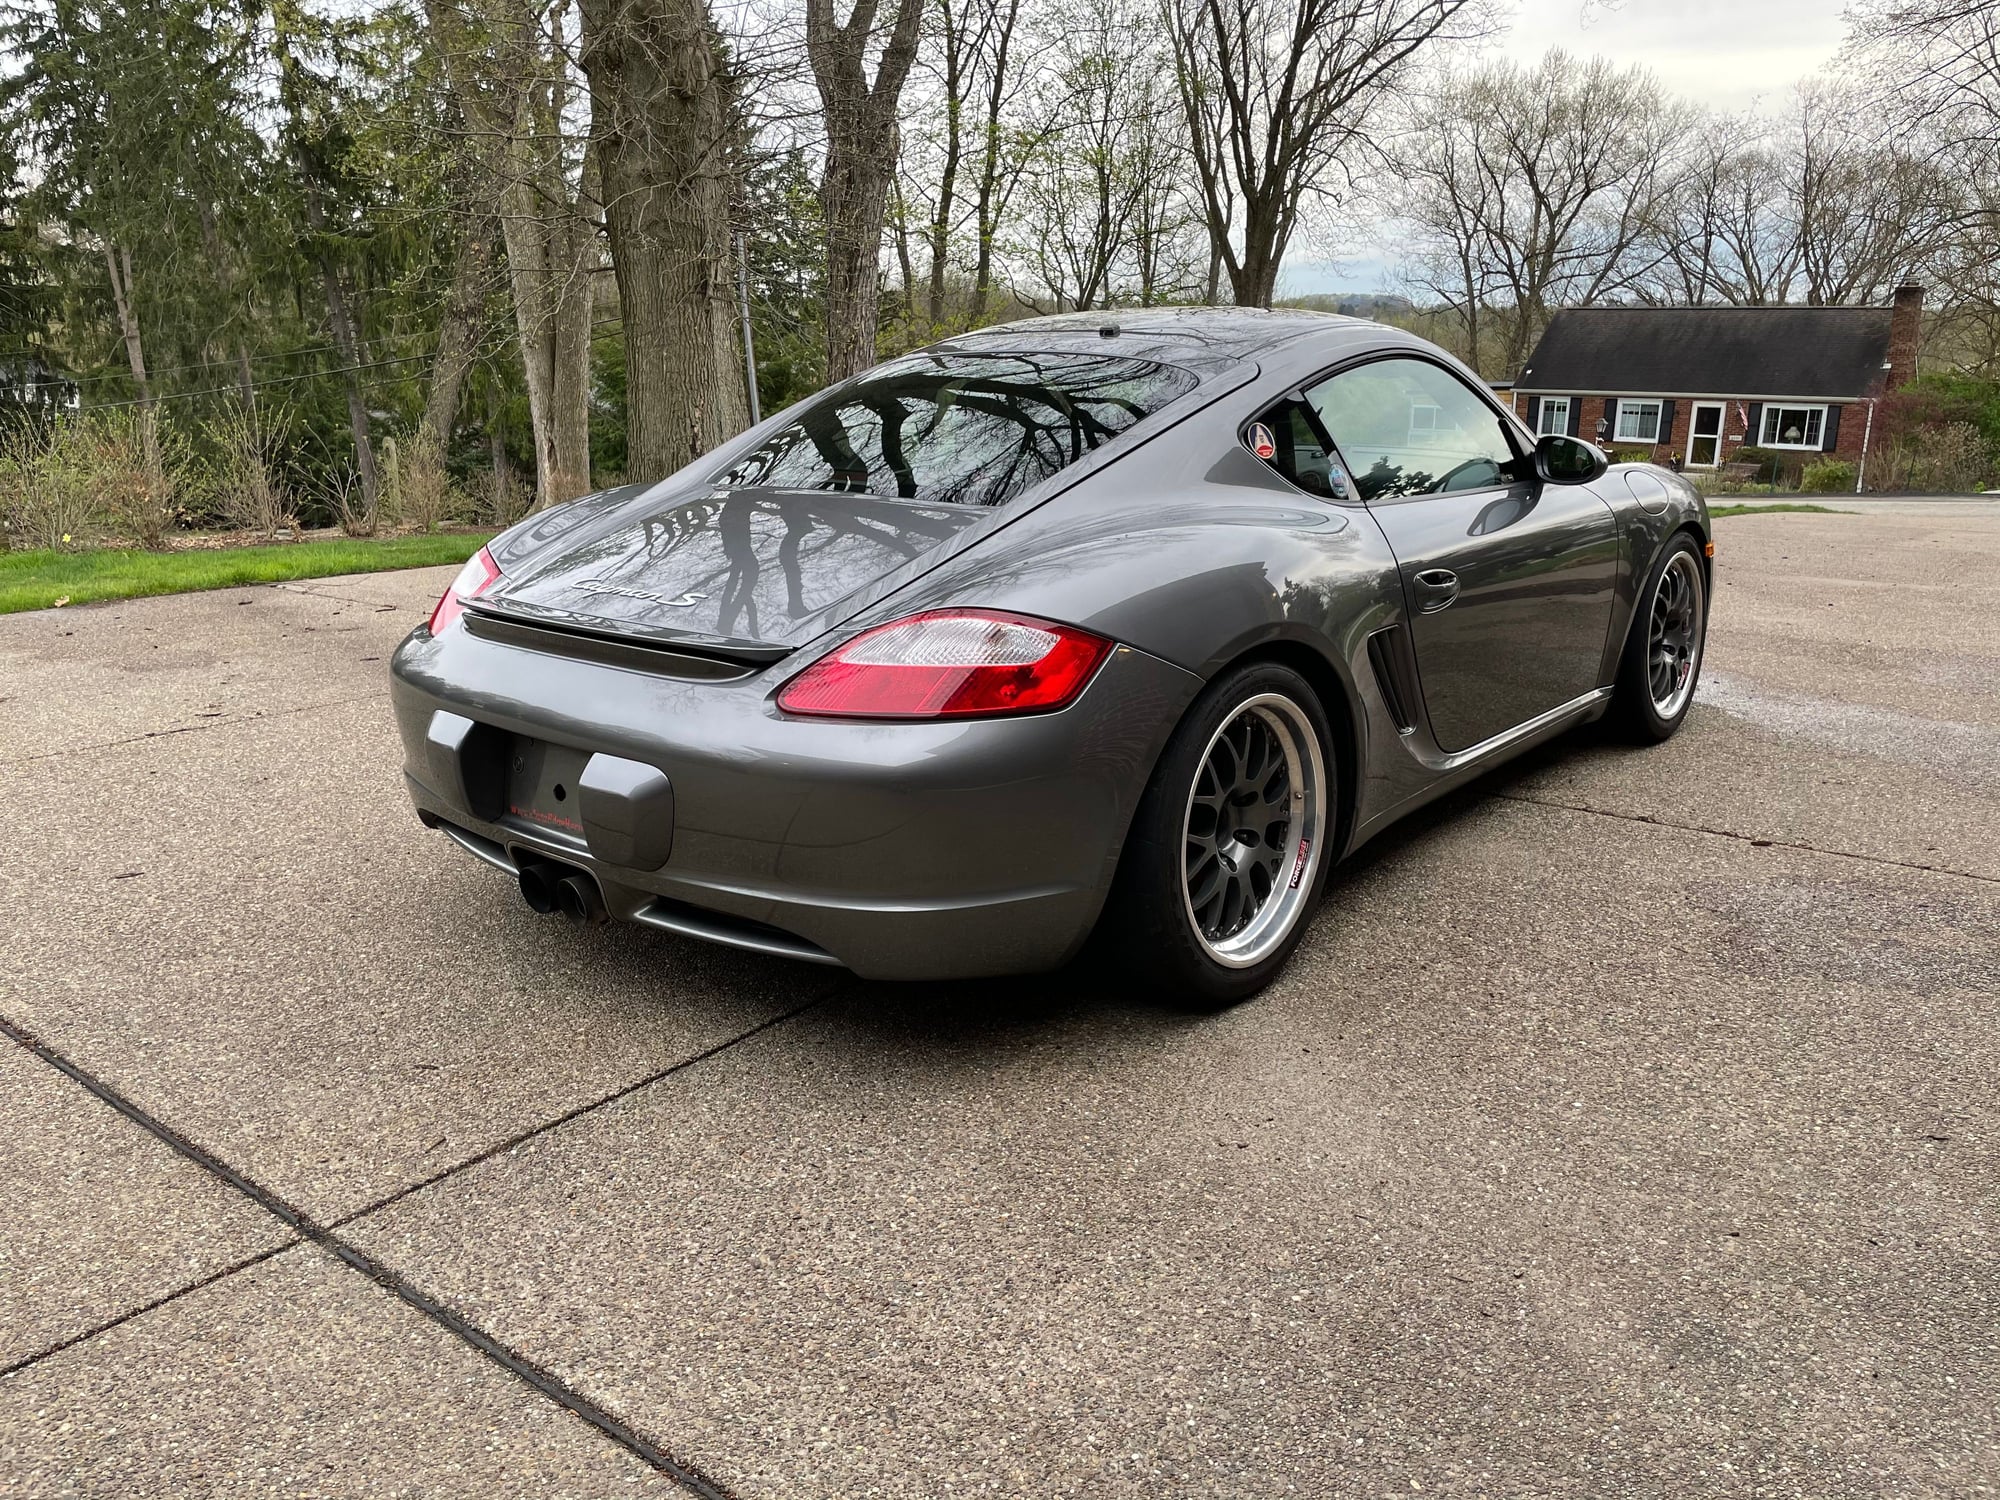 2008 Porsche Cayman - 2008 Porsche Cayman S Class H Race Car $38k OBO Pennsylvania - Used - VIN Wp0ab29878u782854 - 16,511 Miles - 6 cyl - 2WD - Manual - Coupe - Gray - Pgh, PA 15241, United States